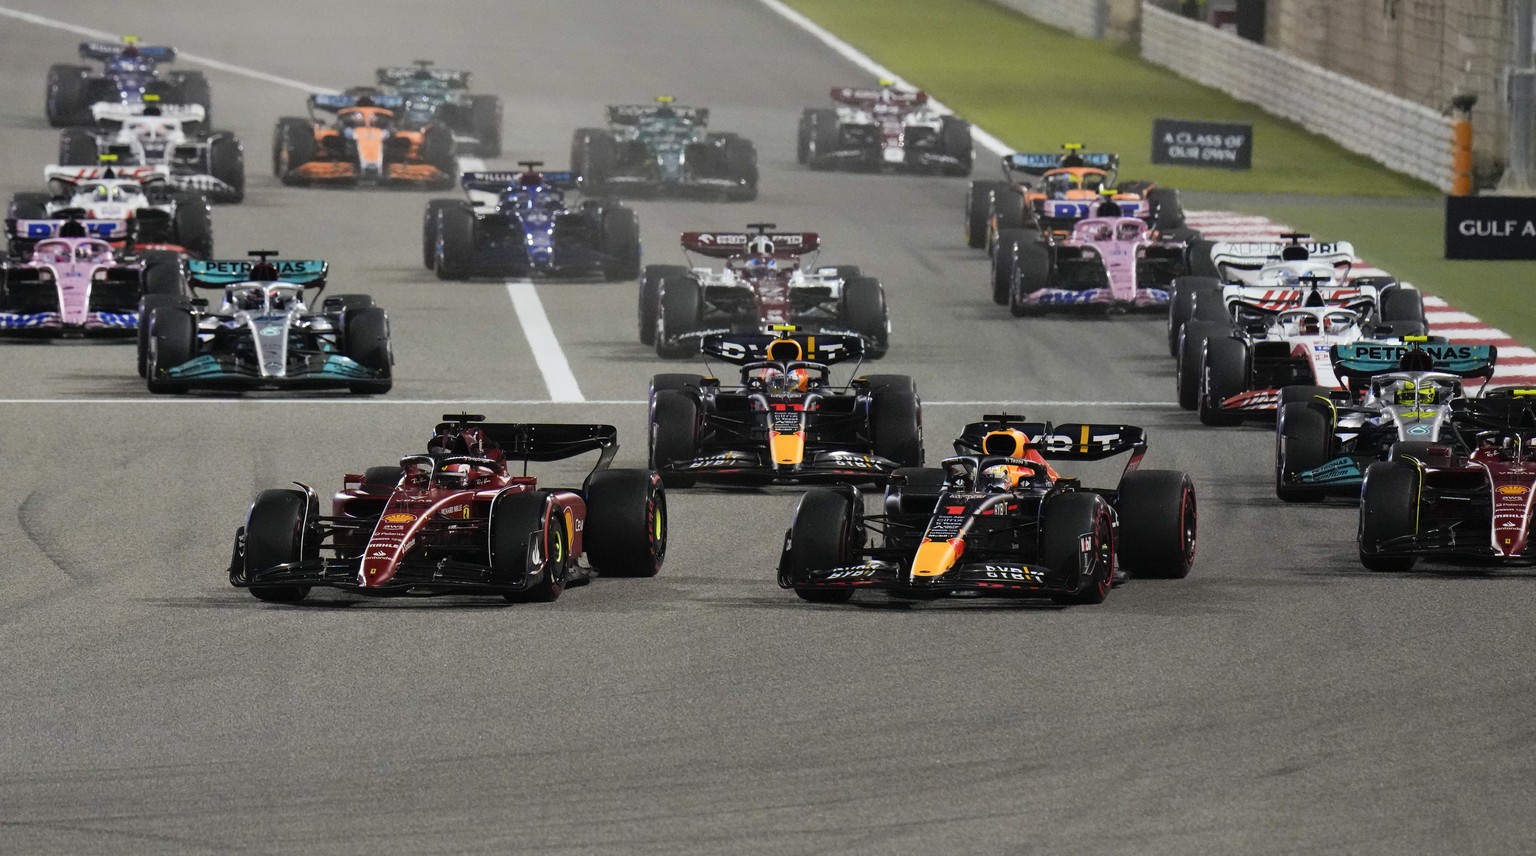 Ferrari driver Charles Leclerc of Monaco, left, and Red Bull driver Max Verstappen of the Netherlands lead at the start during the Formula One Bahrain Grand Prix it in Sakhir, Bahrain, Sunday, March 2 ...